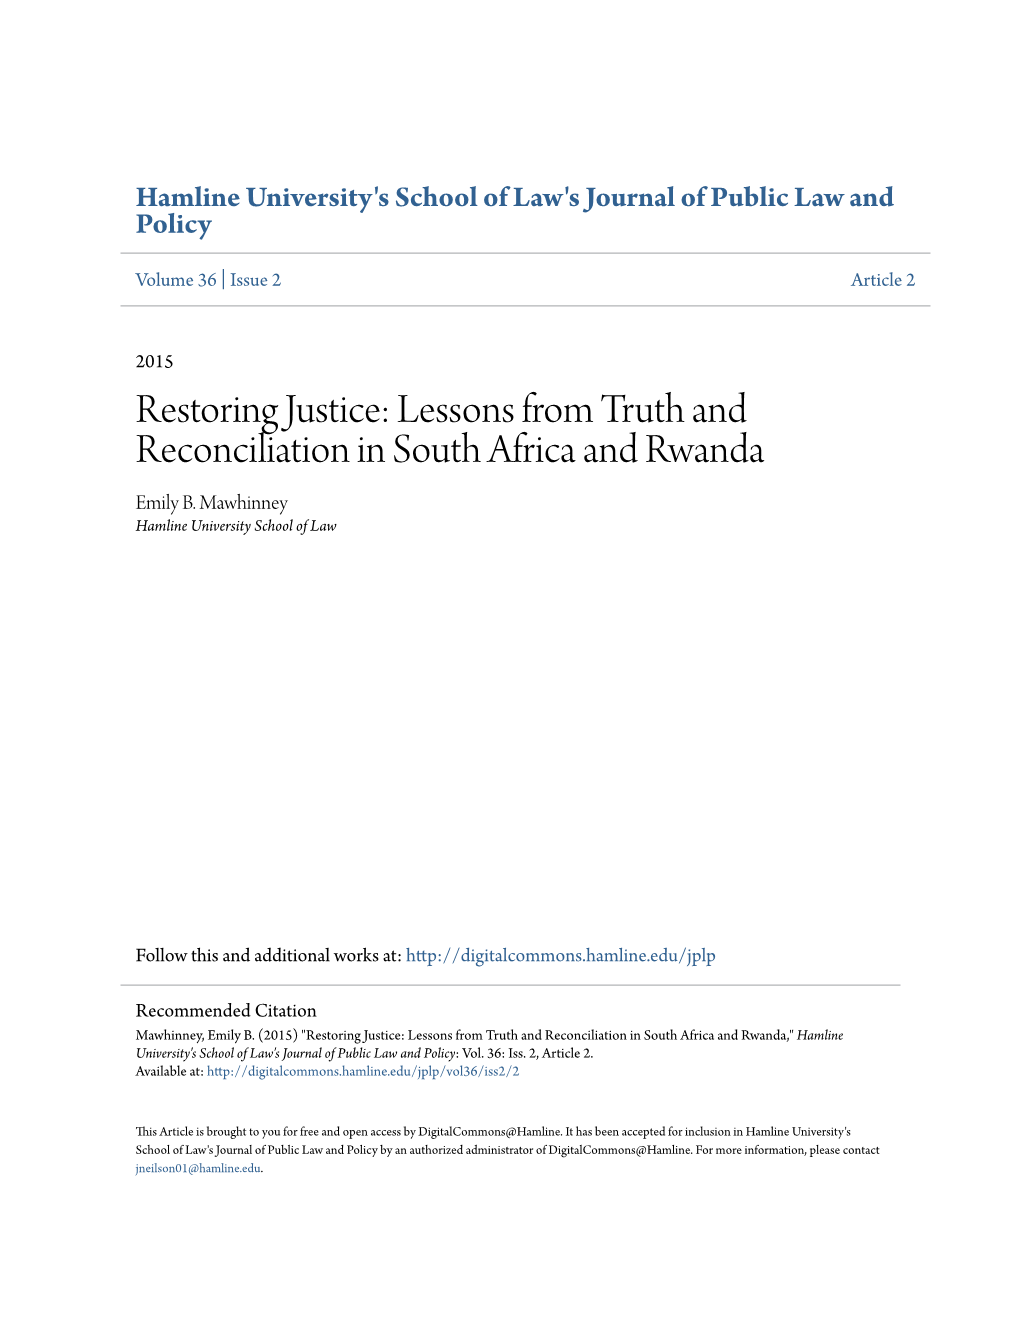 Lessons from Truth and Reconciliation in South Africa and Rwanda Emily B